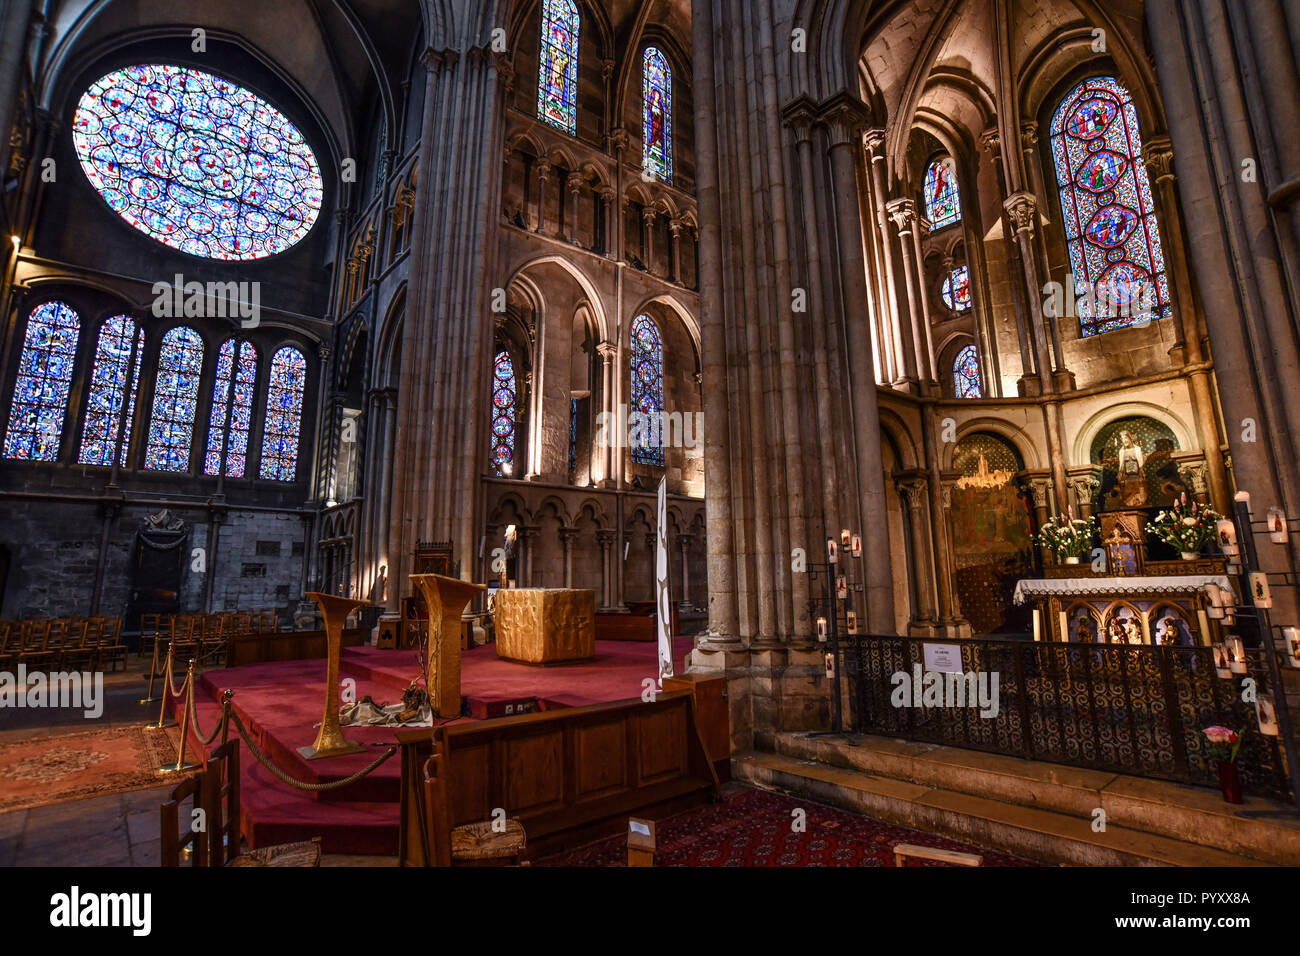 Dijon: interior of the Church of Notre-Dame de Bon-Espoir, formerly called the Black Madonna, a masterpiece of 13th-century Gothic architecture Stock Photo